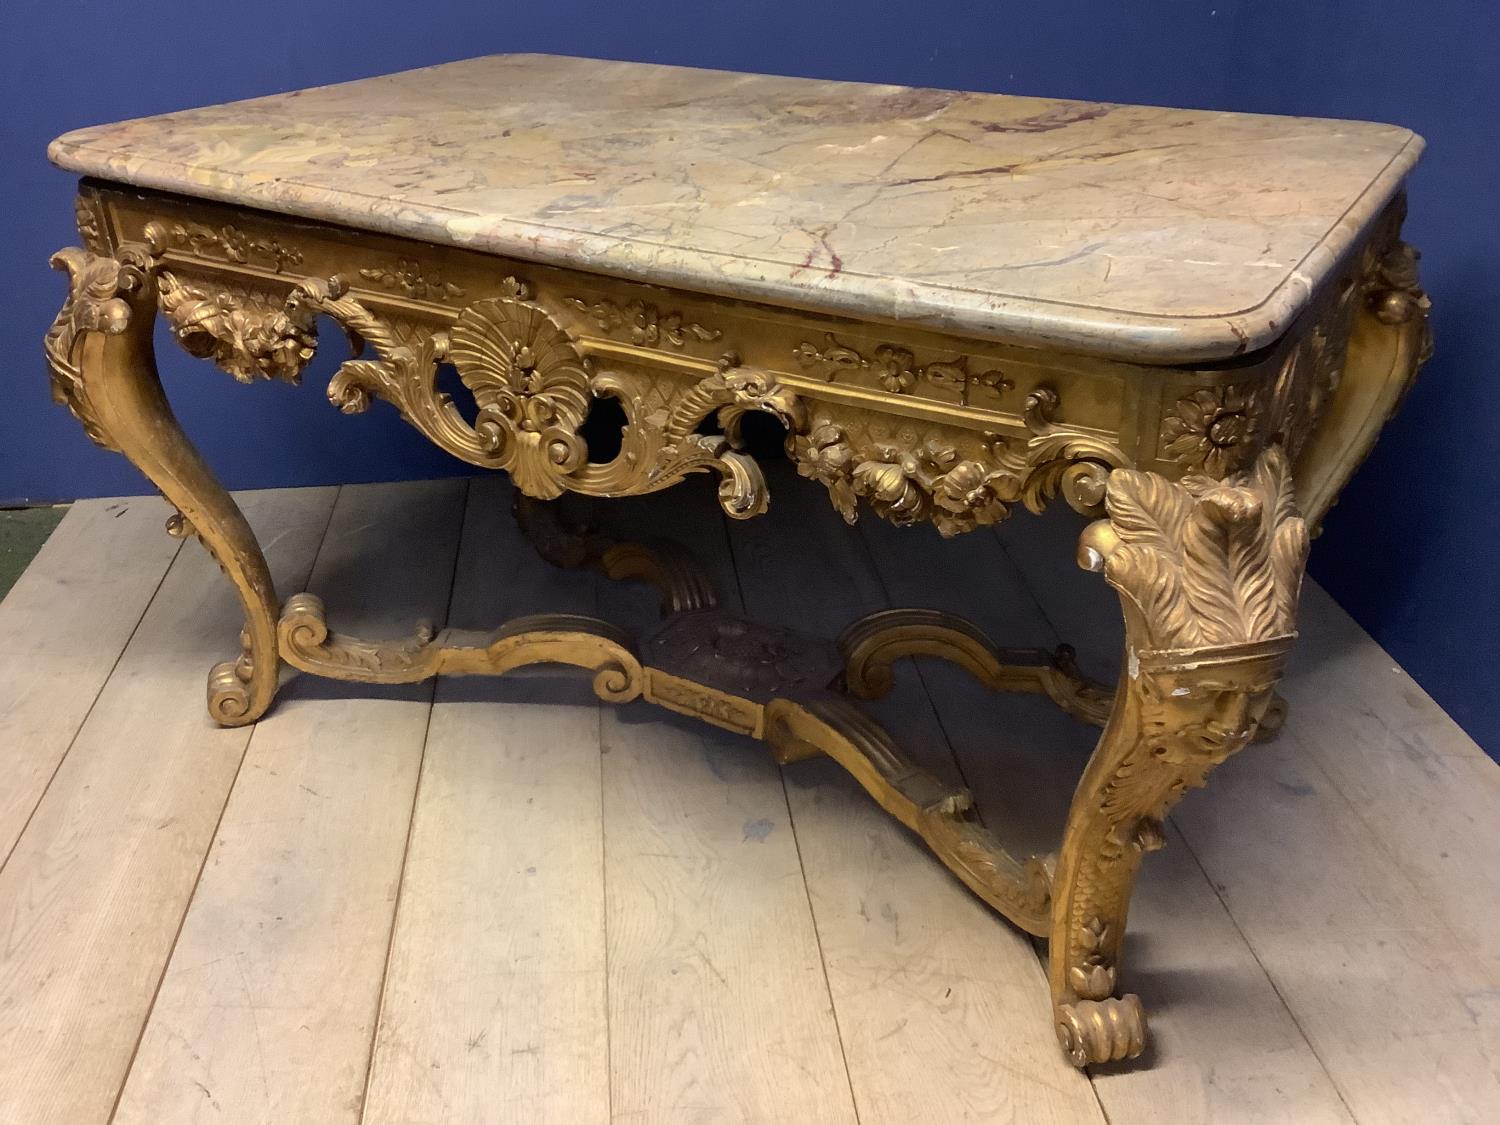 Early C18th/C19th giltwood side table in the manor of William Kent, elaborately carved & gilded unde - Image 3 of 12